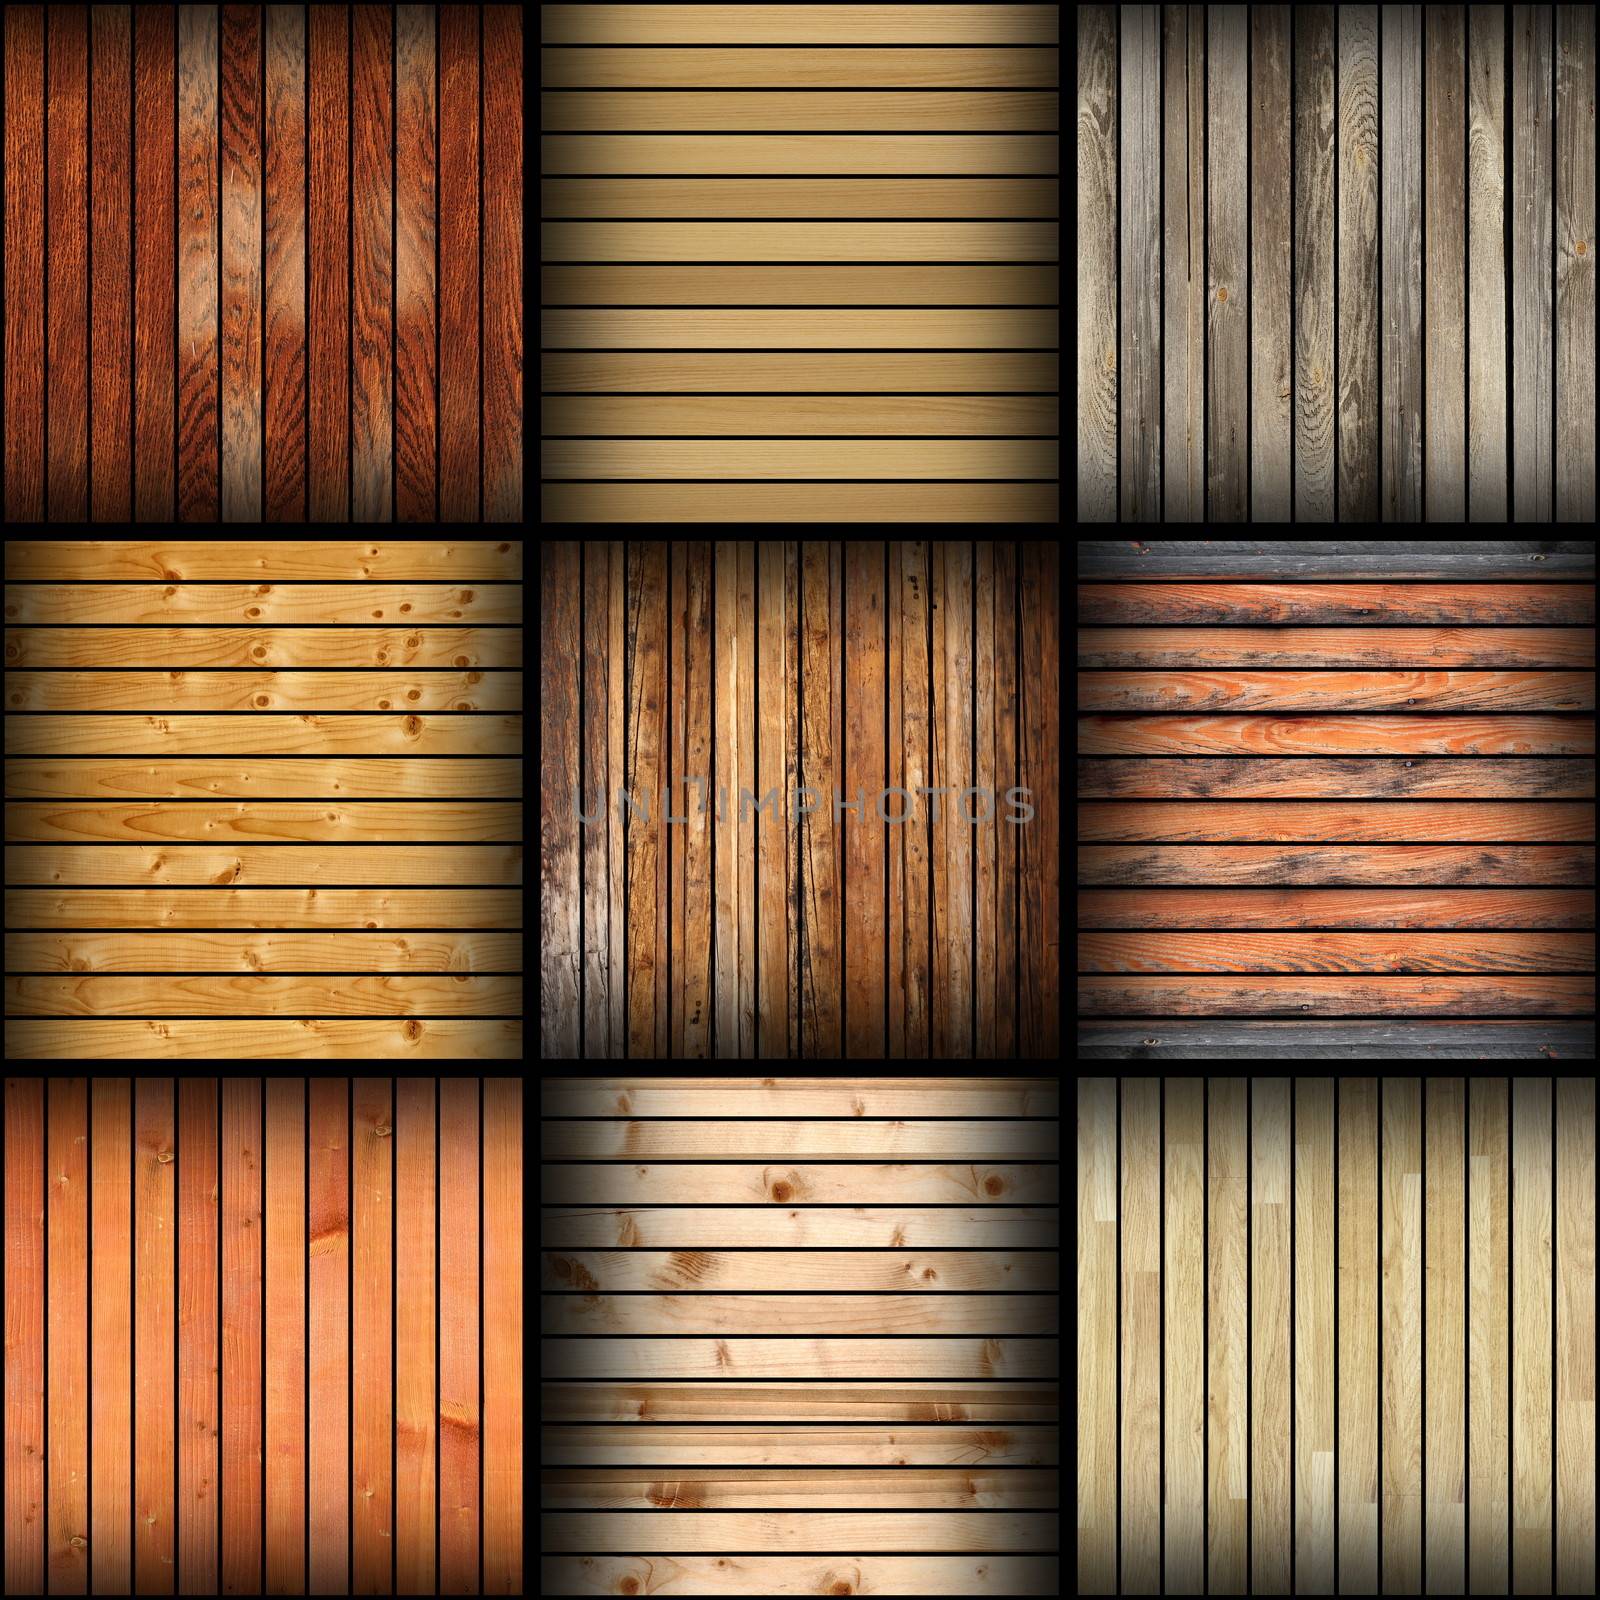 collage of different wooden tiles for floor finishing or other carpentry work